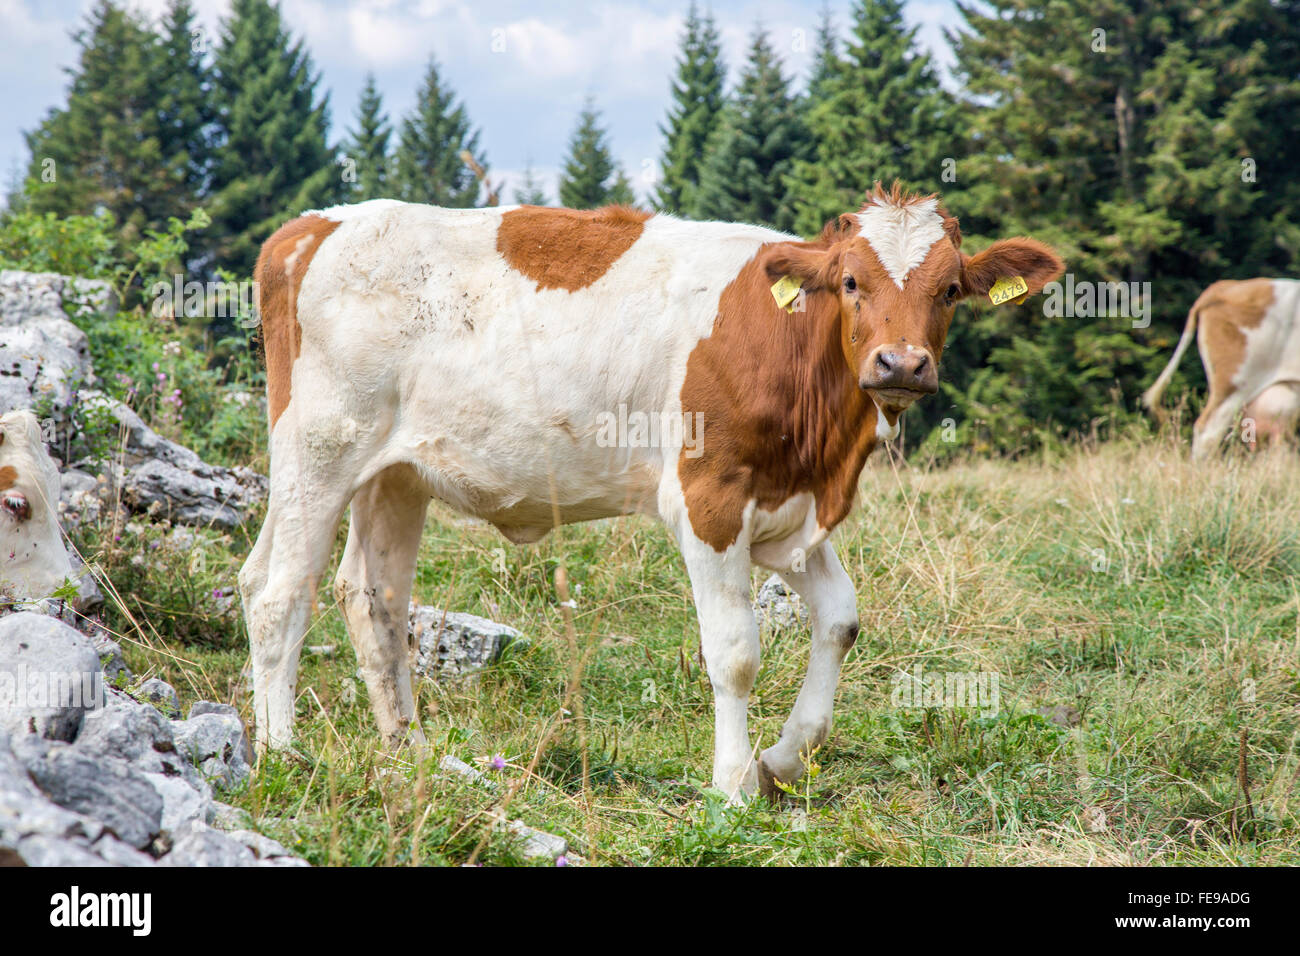 A cow standing and looking at the camera on an alpine pasture Stock Photo